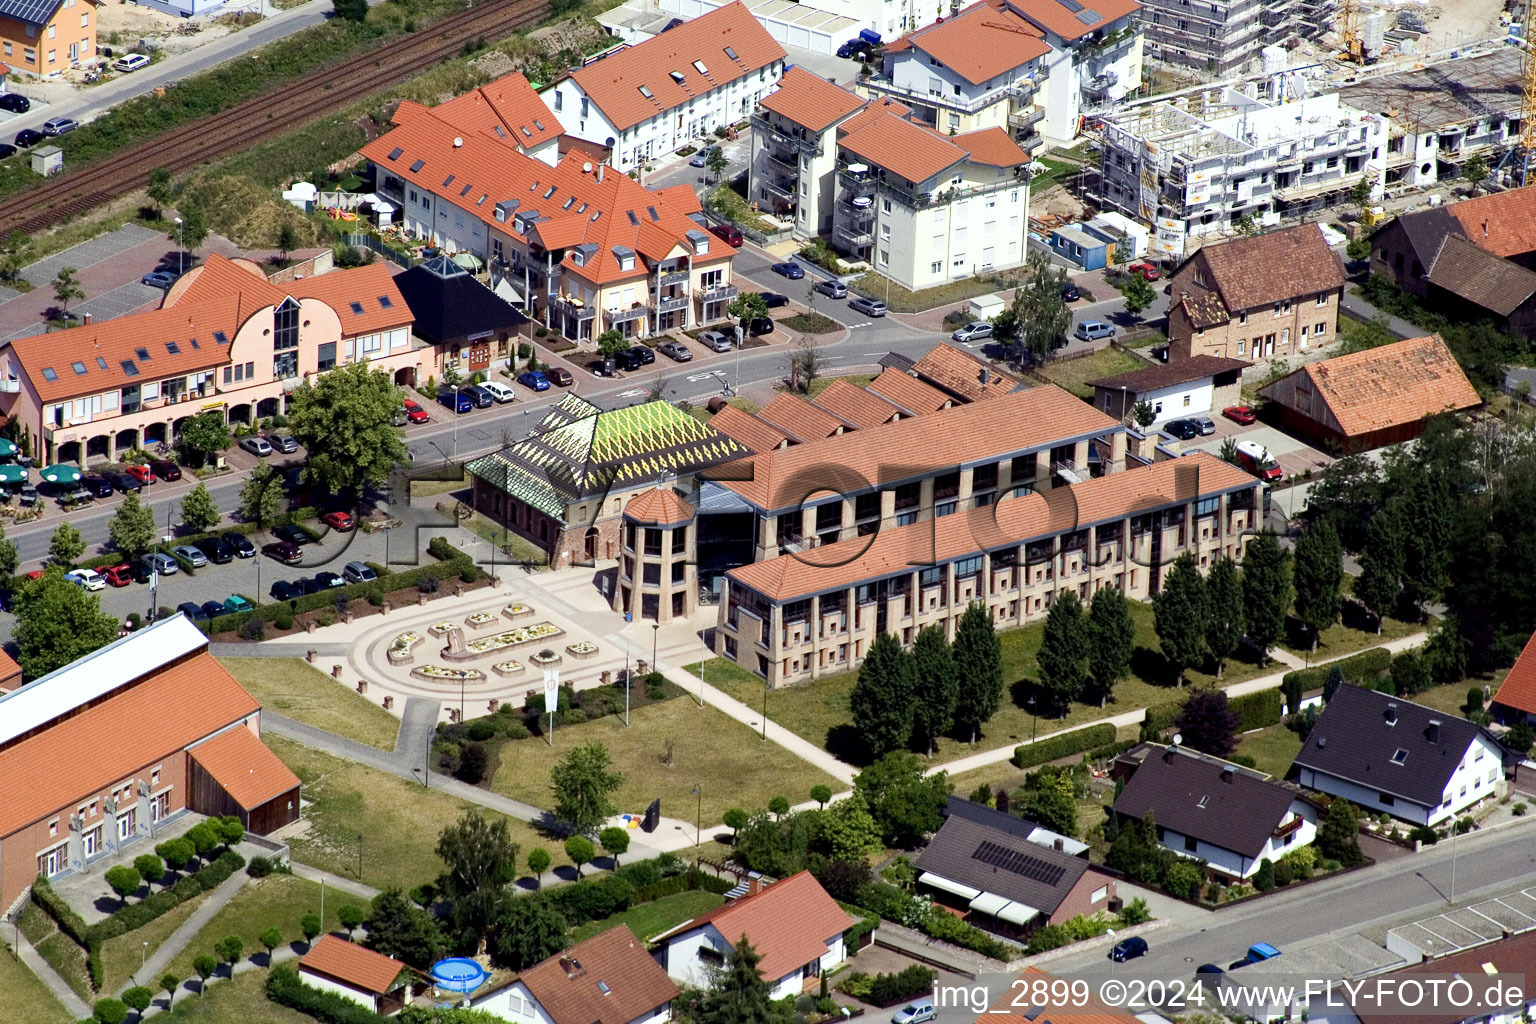 Aerial view of Museum building ensemble Ziegeleimuseum of former brick factory Ludovici in Jockgrim in the state Rhineland-Palatinate